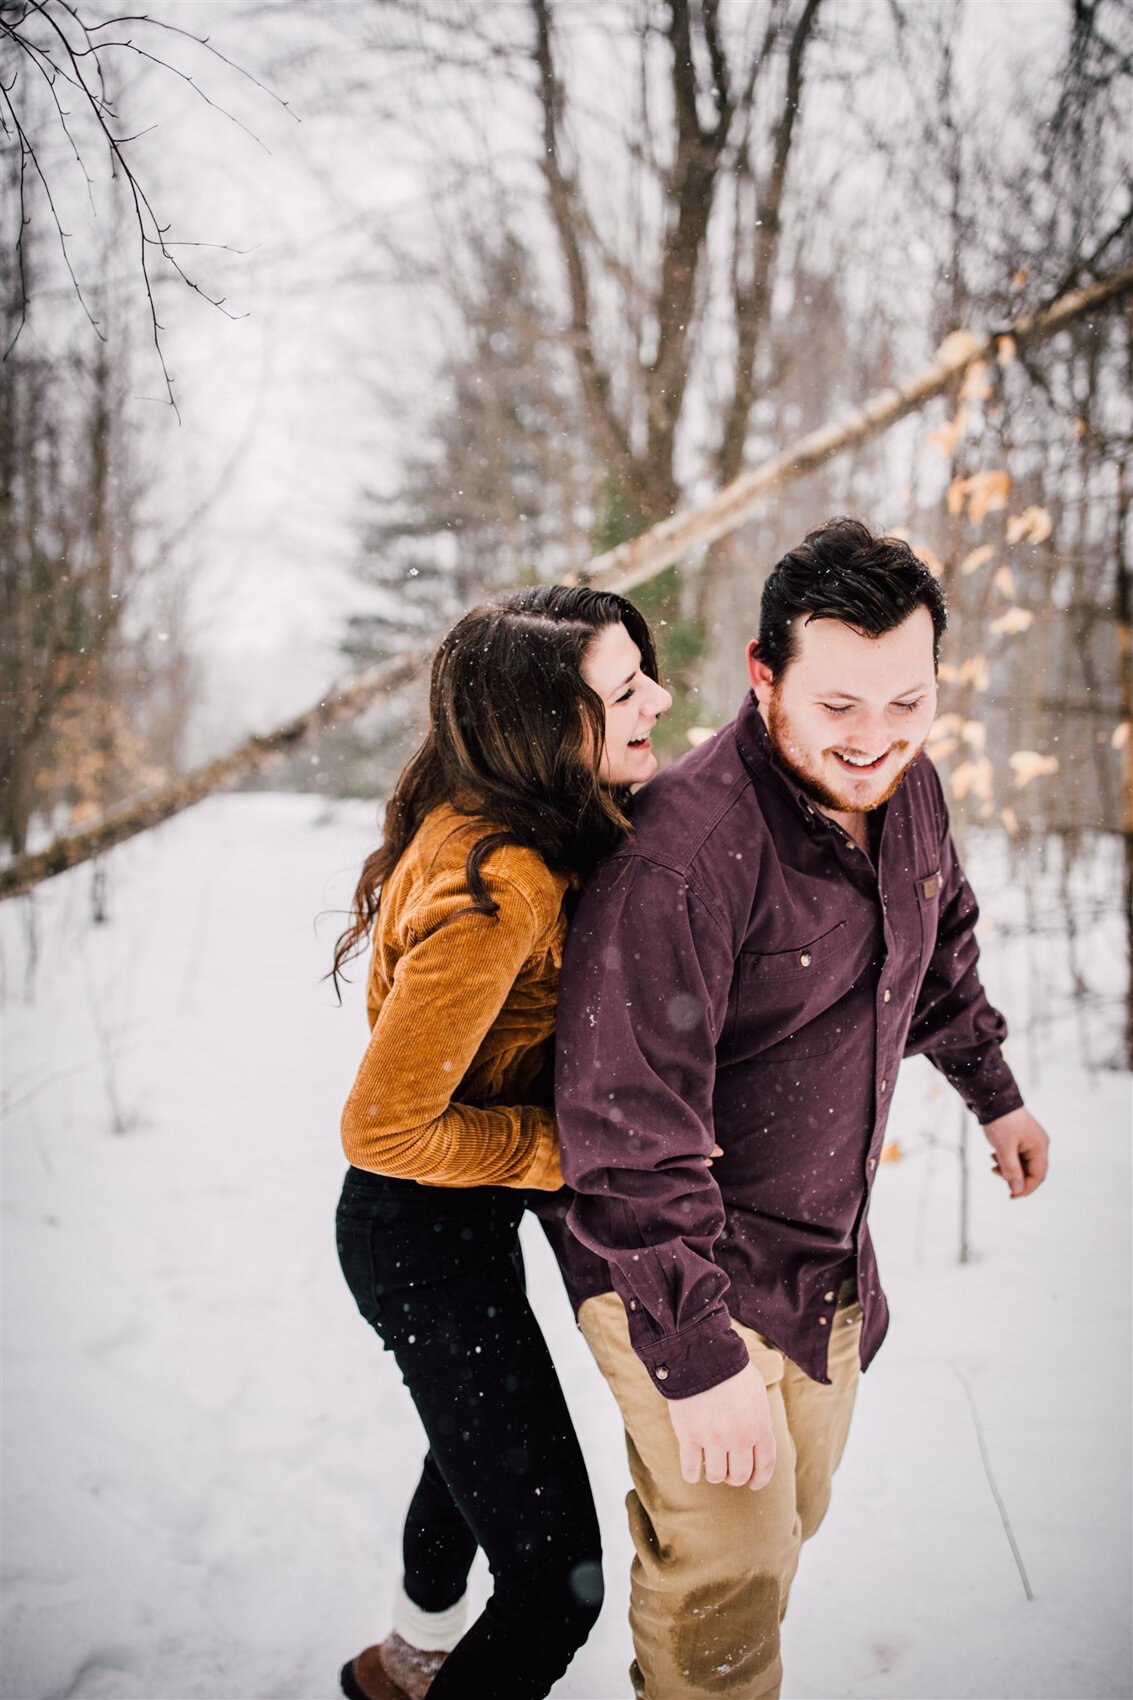 Carlie-and-Joe-Engagement-Pictures-Winter-2020-29.jpg